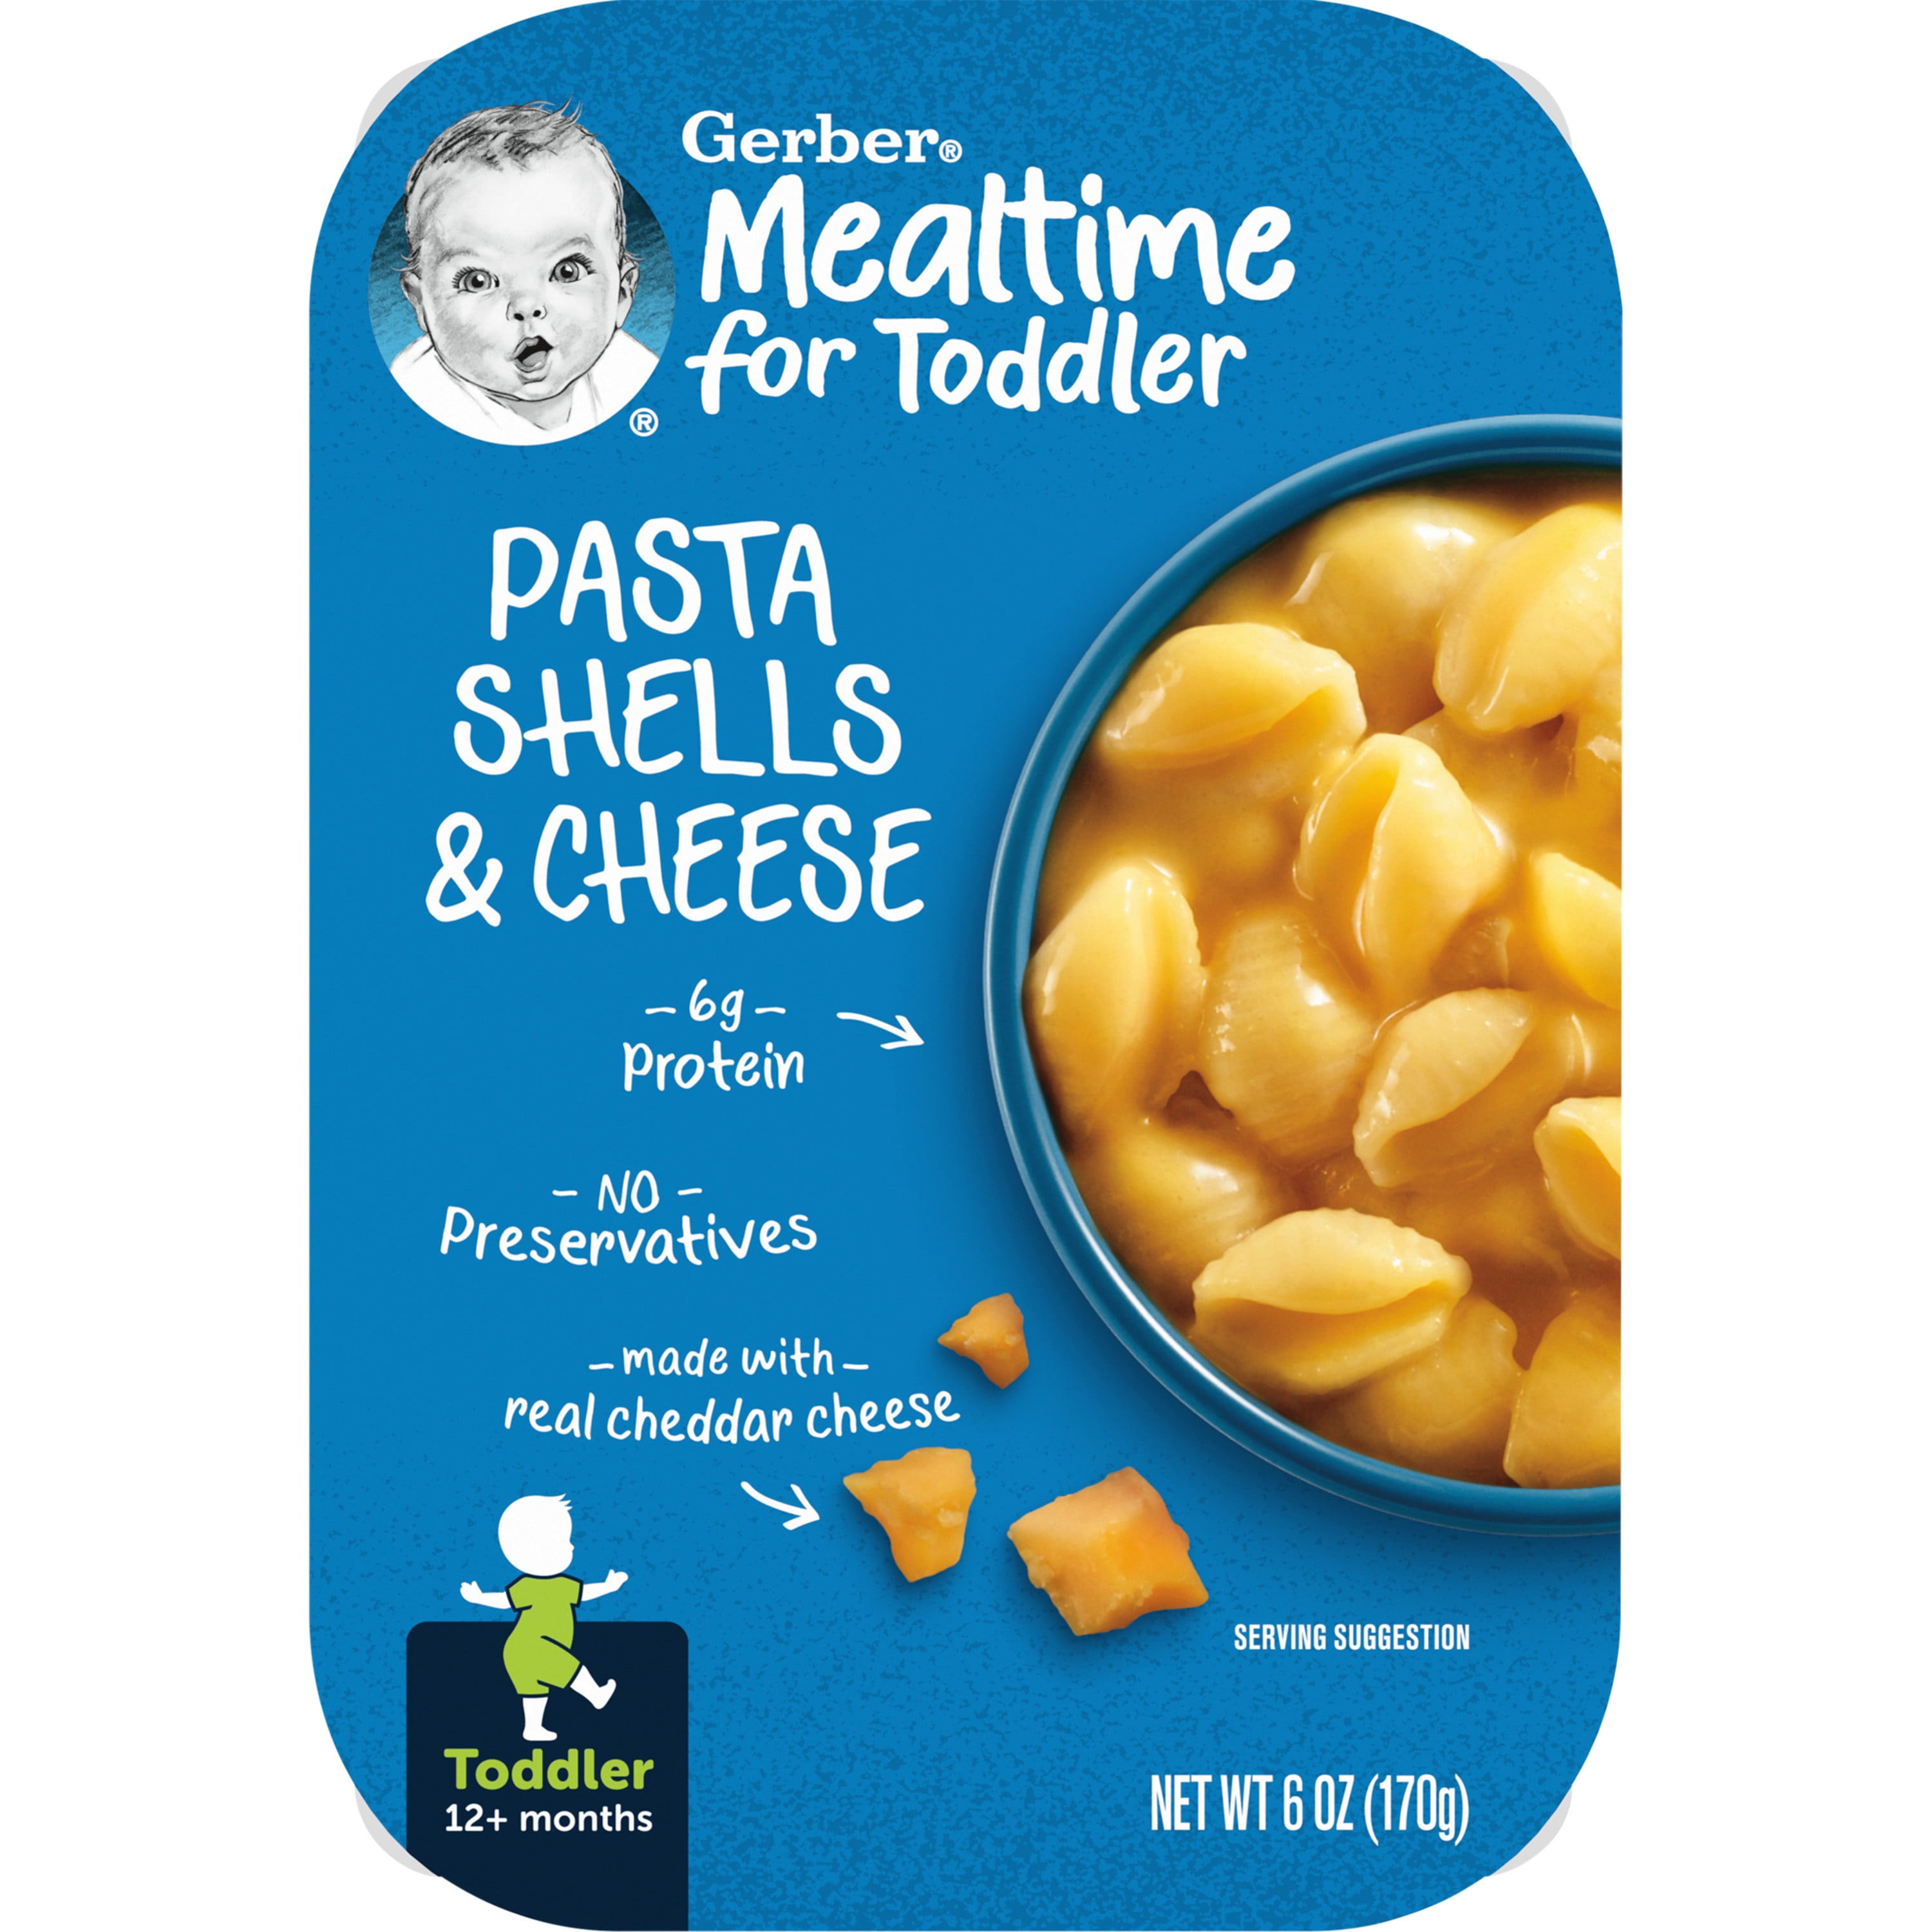 Gerber Mealtime for Toddler, Pasta Shells and Cheese Toddler Food, 6 oz Tray